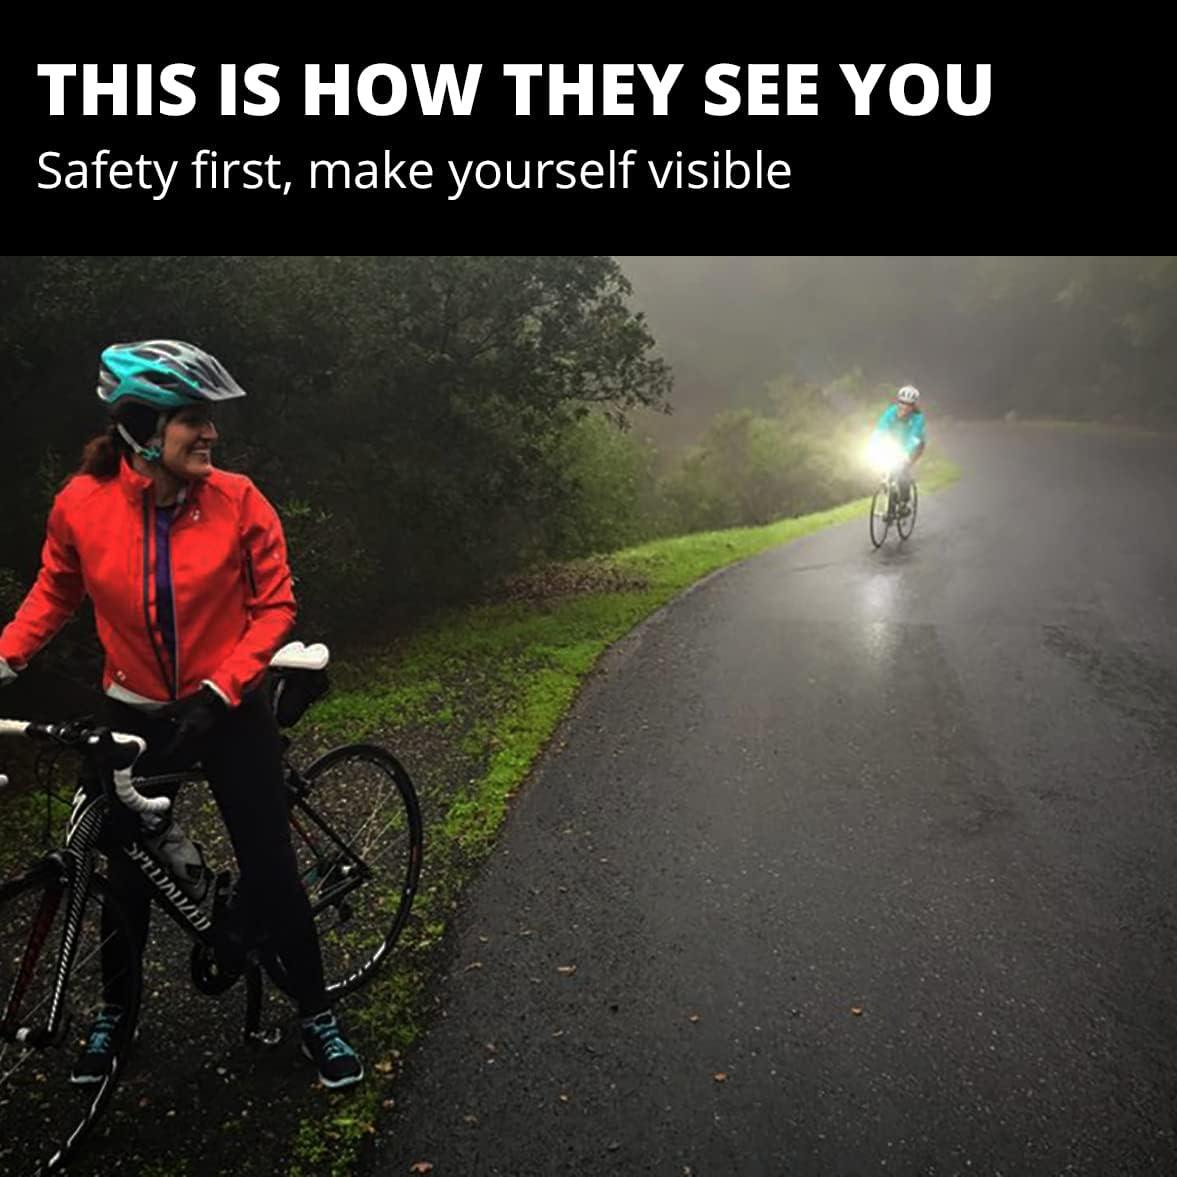 What You Need to Know About Bike Lights